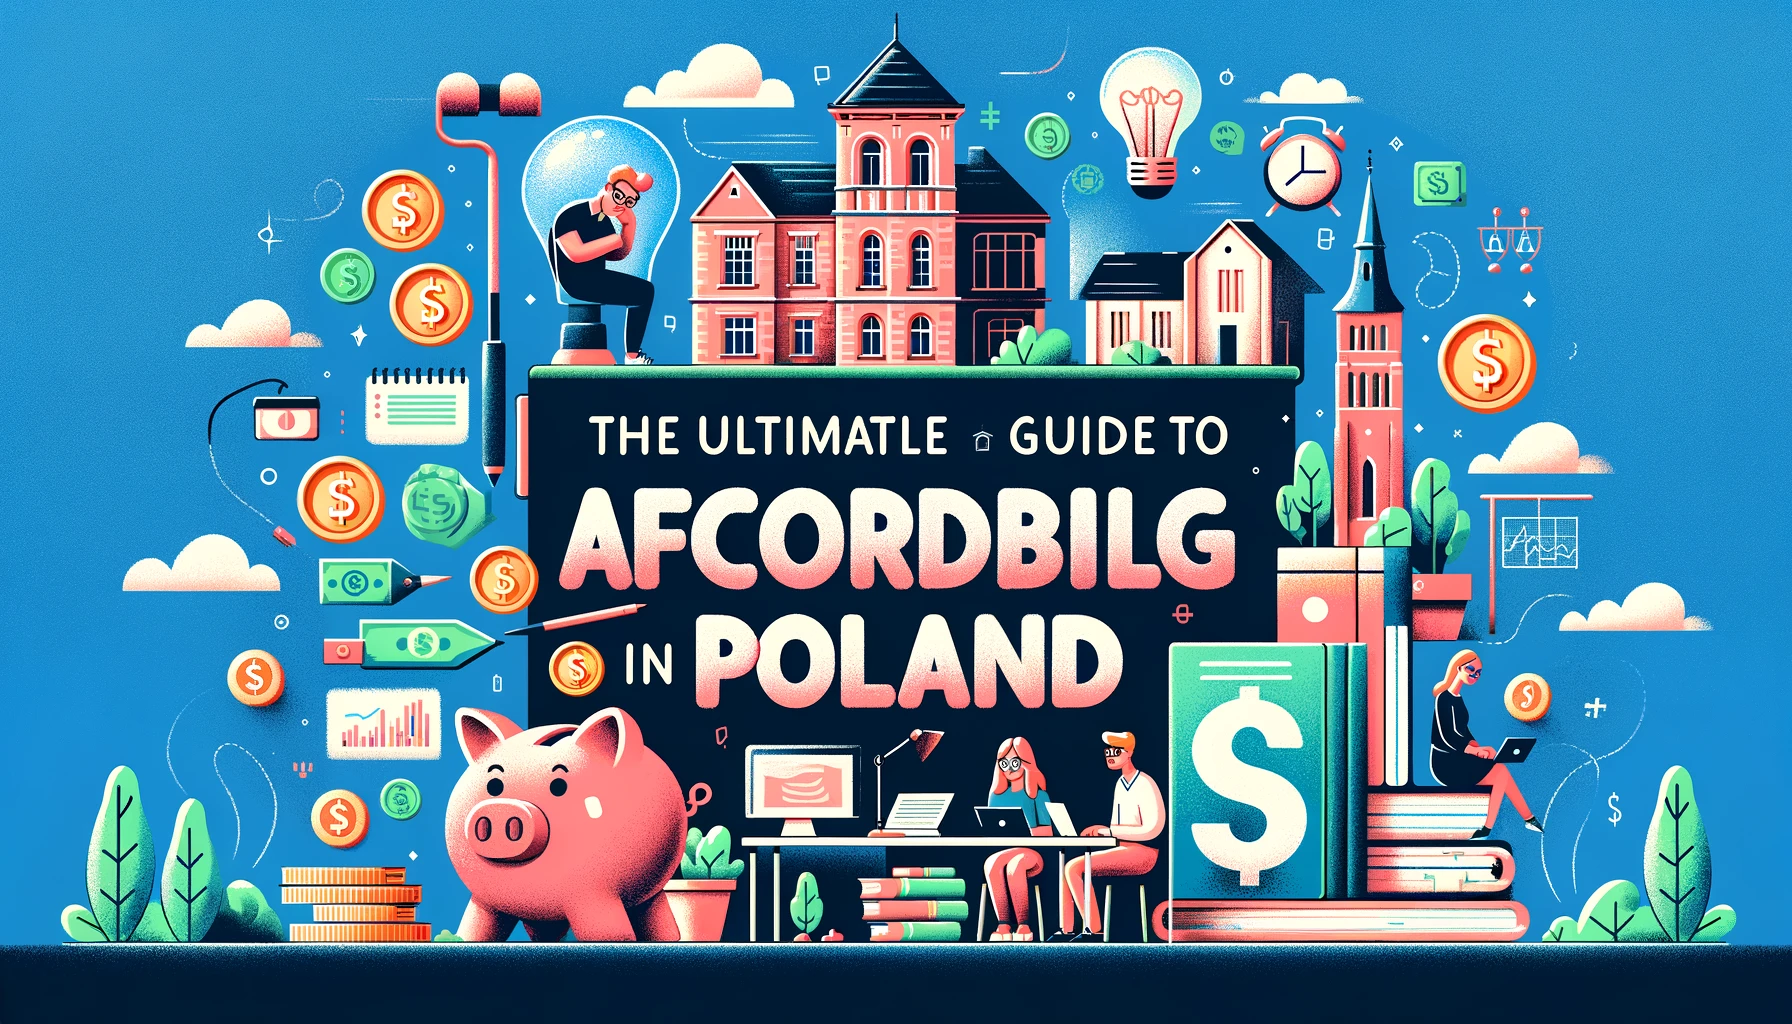 The notion of studying in the heart of Europe without breaking the bank may seem like a myth, but let us assure you, it's as real as the pierogi that fill Poland's bustling street markets! Welcome to our ultimate guide to affordable studying in Poland, a hidden gem for international students seeking quality education at a fraction of usual costs. This enchanting country not only offers some of Europe’s most revered educational institutions but also finds its strength in an economical cost structure that does not sacrifice quality for affordability. Can you imagine strolling through historic universities one day and exploring breathtaking castles or natural landscapes on another – all while pursuing your academic dreams? If this entices you even slightly, then buckle up your seatbelts and get ready for an enlightening journey revealing how to navigate Poland’s educational landscape without burning through your savings. Get ready to unlock new horizons! Why Study in Poland? Why should Poland be your go-to choice for pursuing your academic dream? This enchanted land renowned for its medieval architecture and rich history also shines brightly on the academic front. With its high quality education offered at a fraction of the cost compared to other European countries, it has emerged as a hot prospect among global students. The Polish education system is wide-ranging, offering a myriad of courses in diverse disciplines - from engineering and arts to medical sciences. The unique blend between theory and practice-inspired learning models allows students to hone their skills while understanding the nuances of their field. Furthermore, an increased demand for professionals trained in English language worldwide gives you another compelling reason to study in Poland where numerous courses are taught exclusively in this universal language! It's all about broadening horizons while not hurting your pocket, here in Poland! Understanding Polish Education System Piercing through the heart of Europe, Poland’s rich academic history steeped in intellectualism is often overlooked. This land, once home to great minds like Marie Curie and Nicolaus Copernicus, has an education system that is uniquely structured and inherently competitive. The Polish education landscape splits from a very young age into different educational paths, fostering the development of specialized skills depending on individual talents and career ambitions. While many international students might associate affordable European education with countries like Germany or the Netherlands, they often miss out on Poland's golden opportunity. The low cost of living coupled with economical tuition fees does not compromise quality. In fact, Polish universities are recognized for their high teaching standards featuring cutting-edge infrastructure and stellar faculty who constructively nurture critical thinking & creativity among the ambitious learners. It's time to truly explore what this hidden gem in Central Europe has to offer! Most Affordable Universities in Poland Diving into the heart of affordability, the University of Warsaw emerges as an unparalleled contender. Ranked consistently among Europe's top 500 universities, it charges a startlingly low tuition fee, starting from just girths above €2000 per year for international students in most undergraduate programs. It isn't just about monetary savings at this academic powerhouse. You'd be immersing yourself into a culturally vibrant city life and can get involved with varied extracurricular activities that enrich your student experience. On another note, if you're setting sail on the tech waters, look no further than Wroclaw University of Science and Technology. Not only does this institution pack a punch in delivering innovative STEM-focused education but also falls lightly on the pocket with its average tuition costs falling under €3000 yearly for most fields of study. From grand libraries to state-of-the-art labs-only experiences, WUST is where affordability tangos with high-quality education brilliantly! Cost of Living and Accommodation Understanding your potential cost of living and accommodation is essential when planning to study abroad in Poland. When compared to other European countries, you'll find that Poland offers appreciably affordable options, without compromising on the quality of life or education standards. What stands out most, are the entirely reasonable prices for accommodation - both university dorms and private rentals which could range from €100 to €300 monthly depending upon city location and size. Furthermore, managing your daily expenses in Poland won't make your wallet wince either. An average student spends about €200 to €500 per month on food, transportation, leisure activities etc., in addition to rent. Even more surprising? You may have more avenues than you know: part-time jobs are plentiful with a unique possibility of internships during studies — making your ‘study—earn—save’ predicament seemingly less challenging as ever before! Scholarships for International Students Digging into the treasure trove of scholarships for international students in Poland, one can unearth numerous opportunities to turn dreams into reality. The Polish Government Scholarships are worth noting, as they cover tuition fees, a monthly allowance, and offer an accommodation grant. Specially designed for non-EU/EEA students, these scholarships act as financial bridges enabling students from around the world to access quality higher education - debt-free. A star that shines brightly in this galaxy of scholarships is the ‘Ignacy Łukasiewicz Scholarship Program’. This not only covers tuition but genuinely invests in talented minds by also providing language courses and a living allowance. Other lucrative scholarships include the 'Polish National Agency for Academic Exchange,' and private scholarships offered directly by universities like the University of Warsaw and Jagiellonian University. Each one promises a unique blend of benefits that will significantly reduce your study costs while enriching your overall educational experience in Poland's historic institutions. Working While Studying in Poland There's a certain charm that attaches itself to the idea of juggling studies with work, especially in an international environment as Poland. Amidst the historic architectures and culturally rich cities, lies an opportunity for foreign students to navigate exciting part-time work landscapes all while making their academic pursuits a reality. Experiencing first hand the intricate blend of Poland’s booming cosmopolitan life and rustic traditions gives you more than just pocket money - it crafts an enriched study abroad journey seeped in cultural immersion. As impressive as this may seem on the surface, there is also something inherently beneficial about working while studying in Poland. It's not just about earning — it refines one’s self-management skills and widens intercultural competence too. Besides, what could be more satisfying than applying what you've learned at university into your job or using real-life work situations to contribute uniquely to class discussions? Through these experiences, students prepare themselves for competitive global career markets post-graduation and enjoy greater employment prospects in their chosen fields. Experiencing Polish Culture and Lifestyle Experience the true facets of Polish culture and lifestyle which will add an enthralling layer to your educational journey. Poland harbors deeply-rooted traditions, it's where history mingles wonderfully with modernity, providing unique perspectives - from the vibey nightlife of Warsaw to the historic charm of Kraków, not forgetting the diverse culinary scene that integrates age-old recipes with contemporary dietary trends. This country thrives on community spirit and festivals such as Wigilia or Dozynki give you a refreshing feel about how Poles often come together to celebrate their vibrant heritage. Another beautiful aspect of Polish life is their passion for outdoor activities regardless of the weather – be it canoeing down Augustow Canal during summer or thrilling ski adventures in Zakopane on a winter’s day. Life in Poland ensures you're never stuck for something to do, teaching you balance between hard work during your studies and play during leisure hours. So why not let this hearty European nation charm you as it has countless others who ventured here seeking more than just academic enlightenment! Conclusion: Start Your Polish Educational Journey In conclusion, there has never been a more opportune time to embark on your Polish educational journey. With it's affordable yet high-quality education system, blend of rich history, vibrant culture and promising post-graduation opportunities - studying in Poland truly offers an enriching life-experience that is second to none. The decision to study abroad can be overwhelming but given what Poland has-to-offer - it's an exploration worth undertaking. It not only serves as a gateway into the heart of Europe but also opens doors toward personal progression and professional growth. So go ahead, pack those bags and prepare for a rewarding intellectual adventure in the spectacular land of Poland!